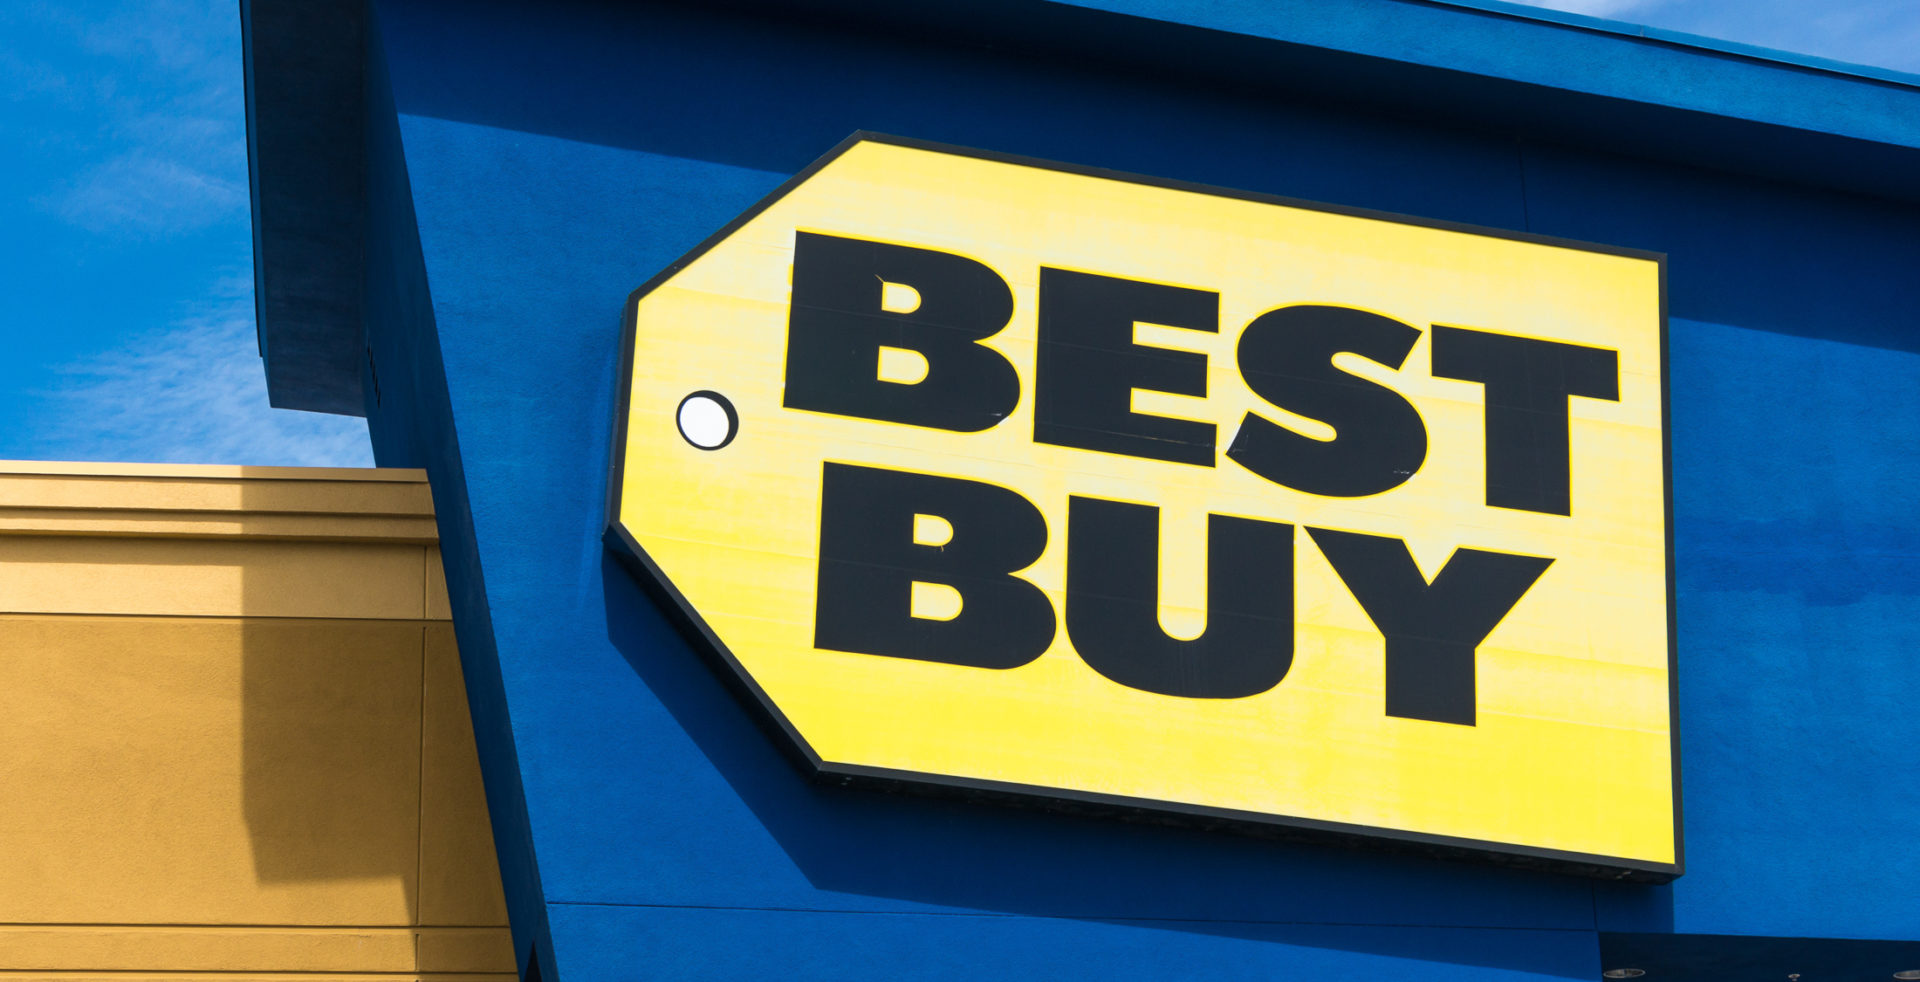 Tech heads: How To Save Money When Shopping at Best Buy